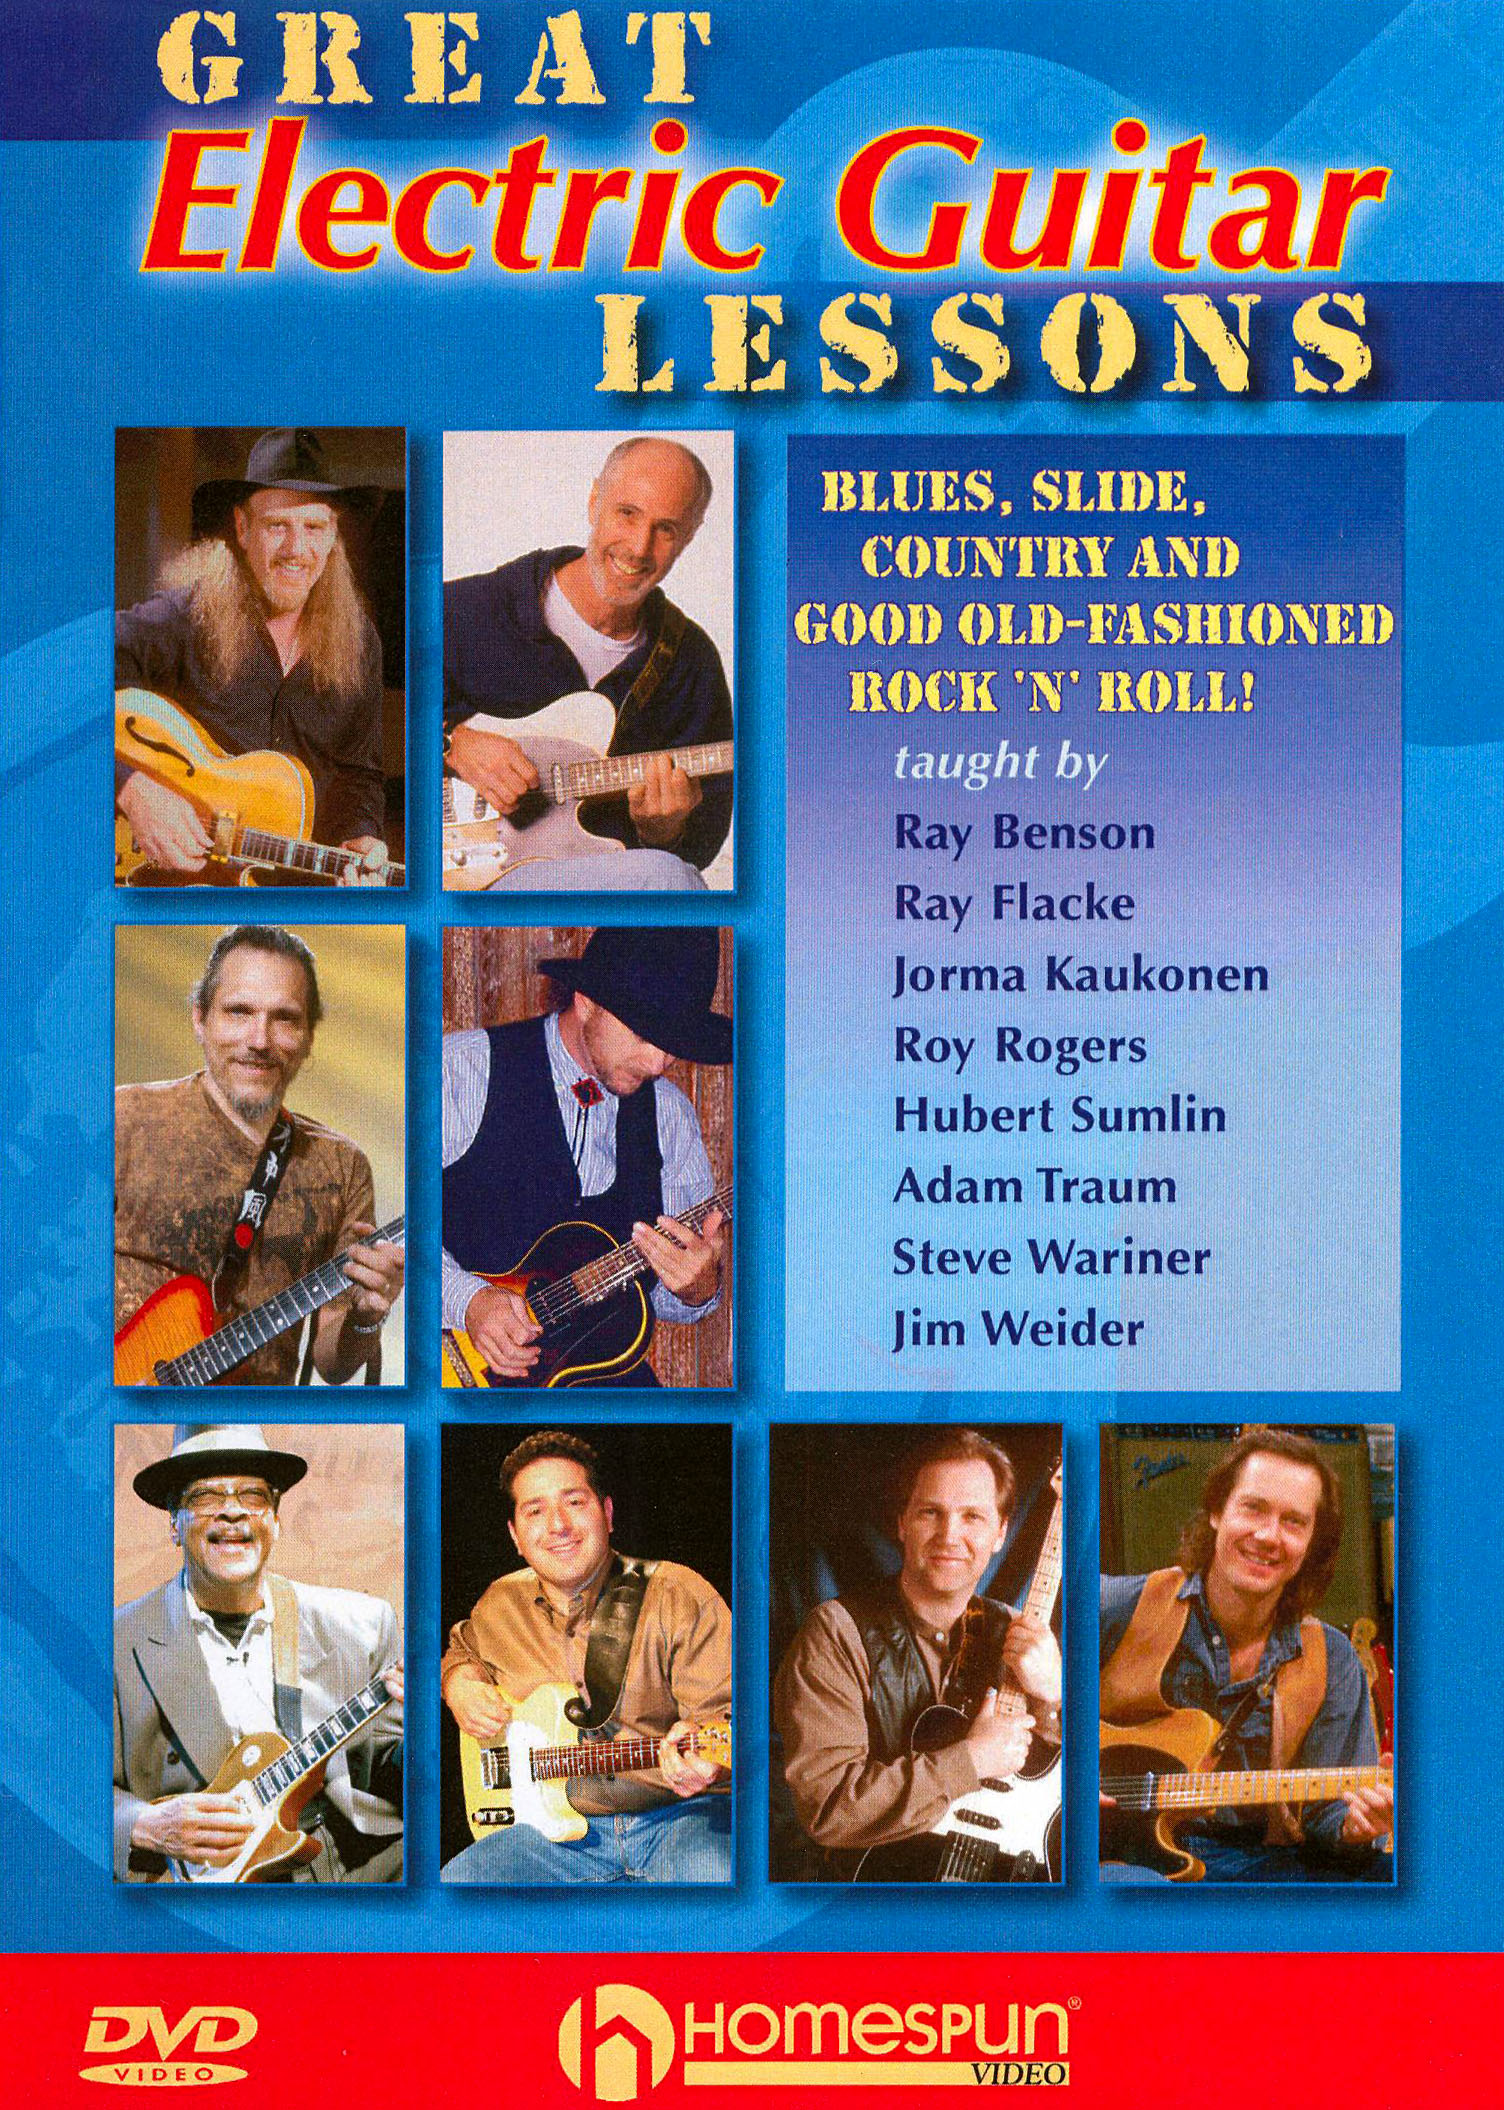 Great Electric Guitar Lessons [DVD]